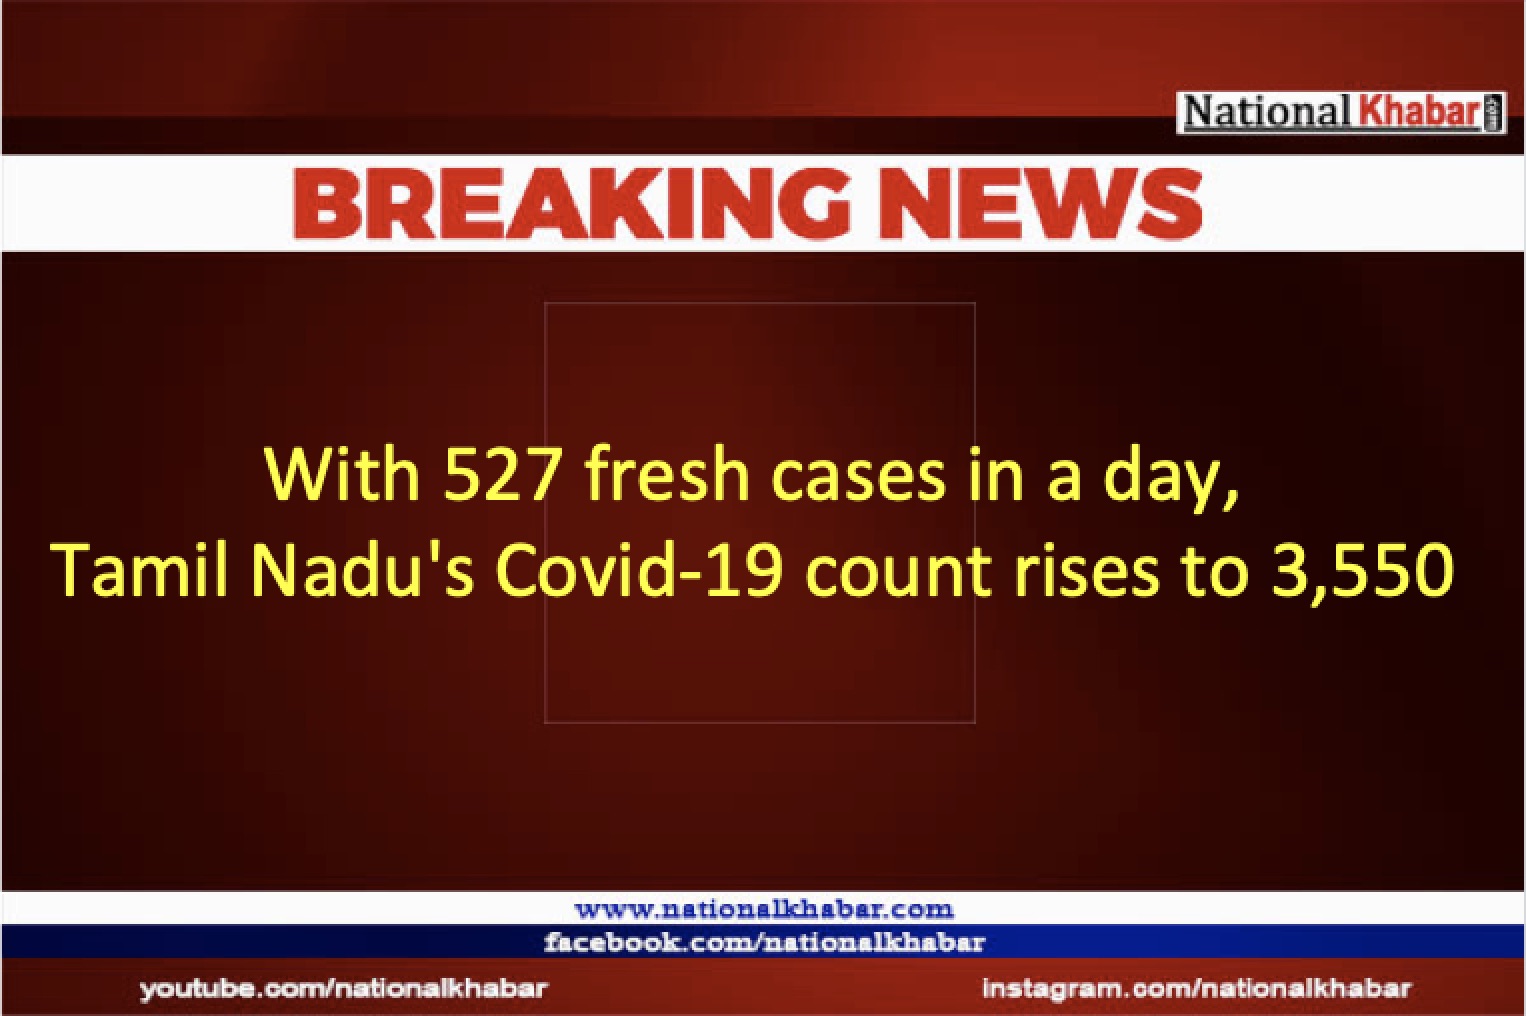 Tamil Nadu's Covid-19 count rises to 3,550